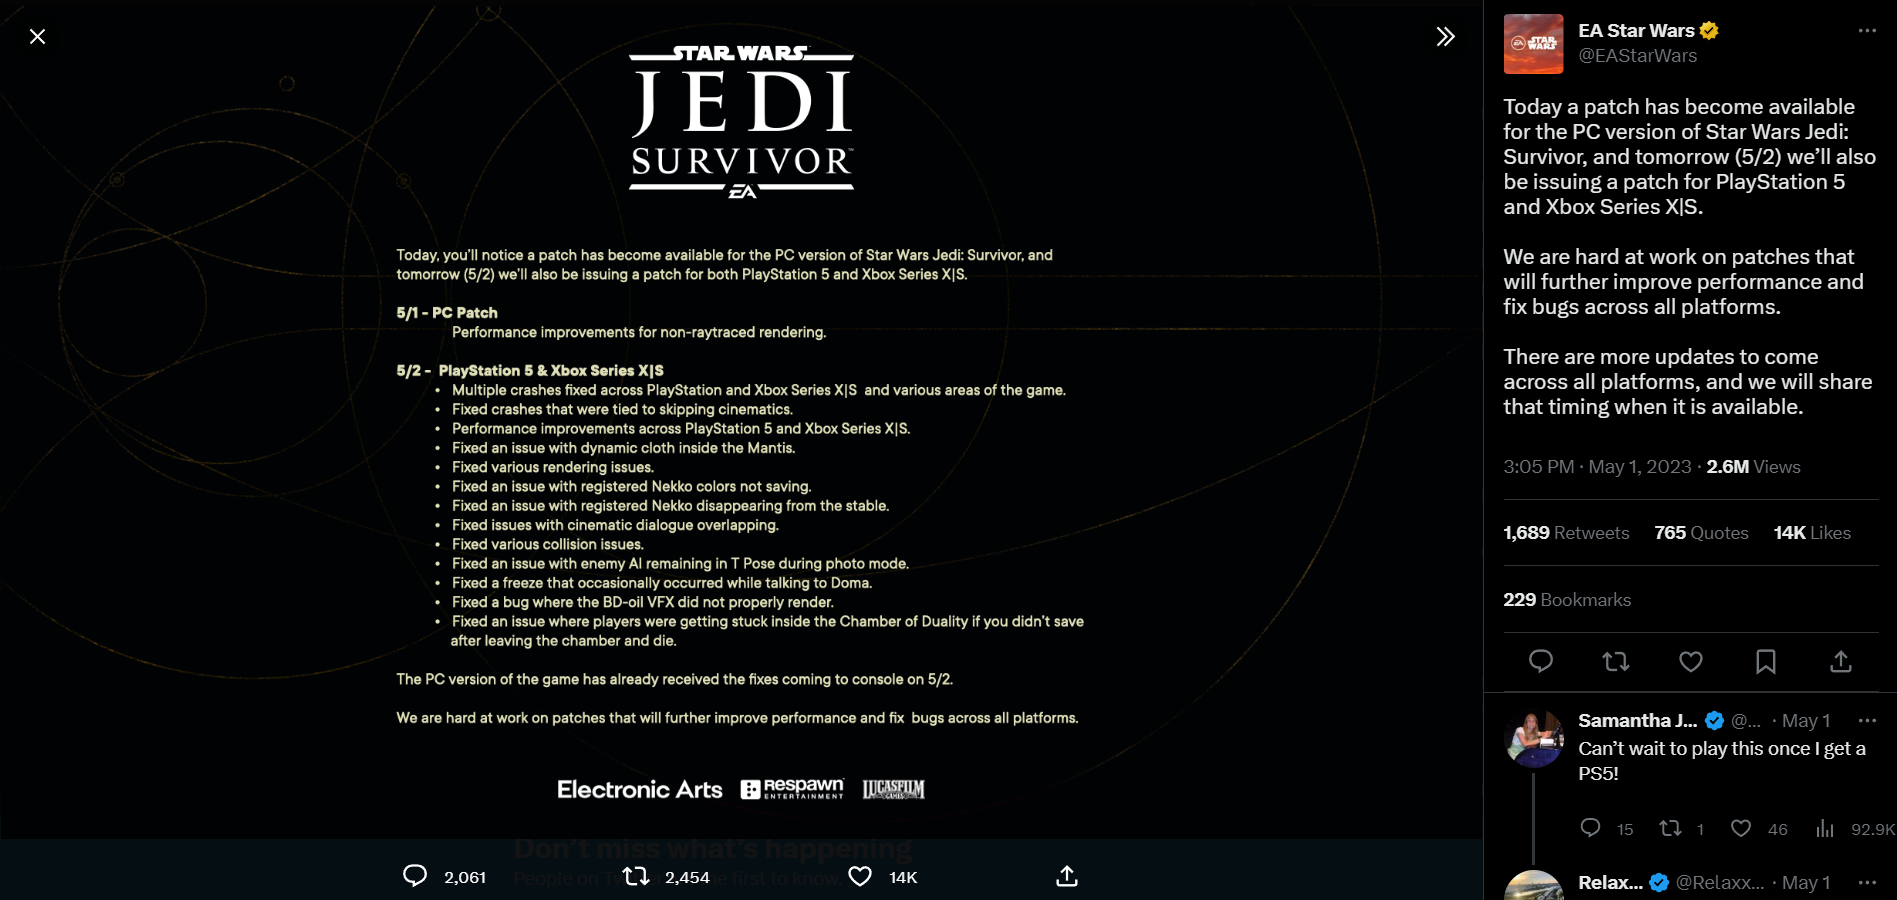 EA addresses a recent patch for Star Wars Jedi: Survivor and insists more are coming via Twitter